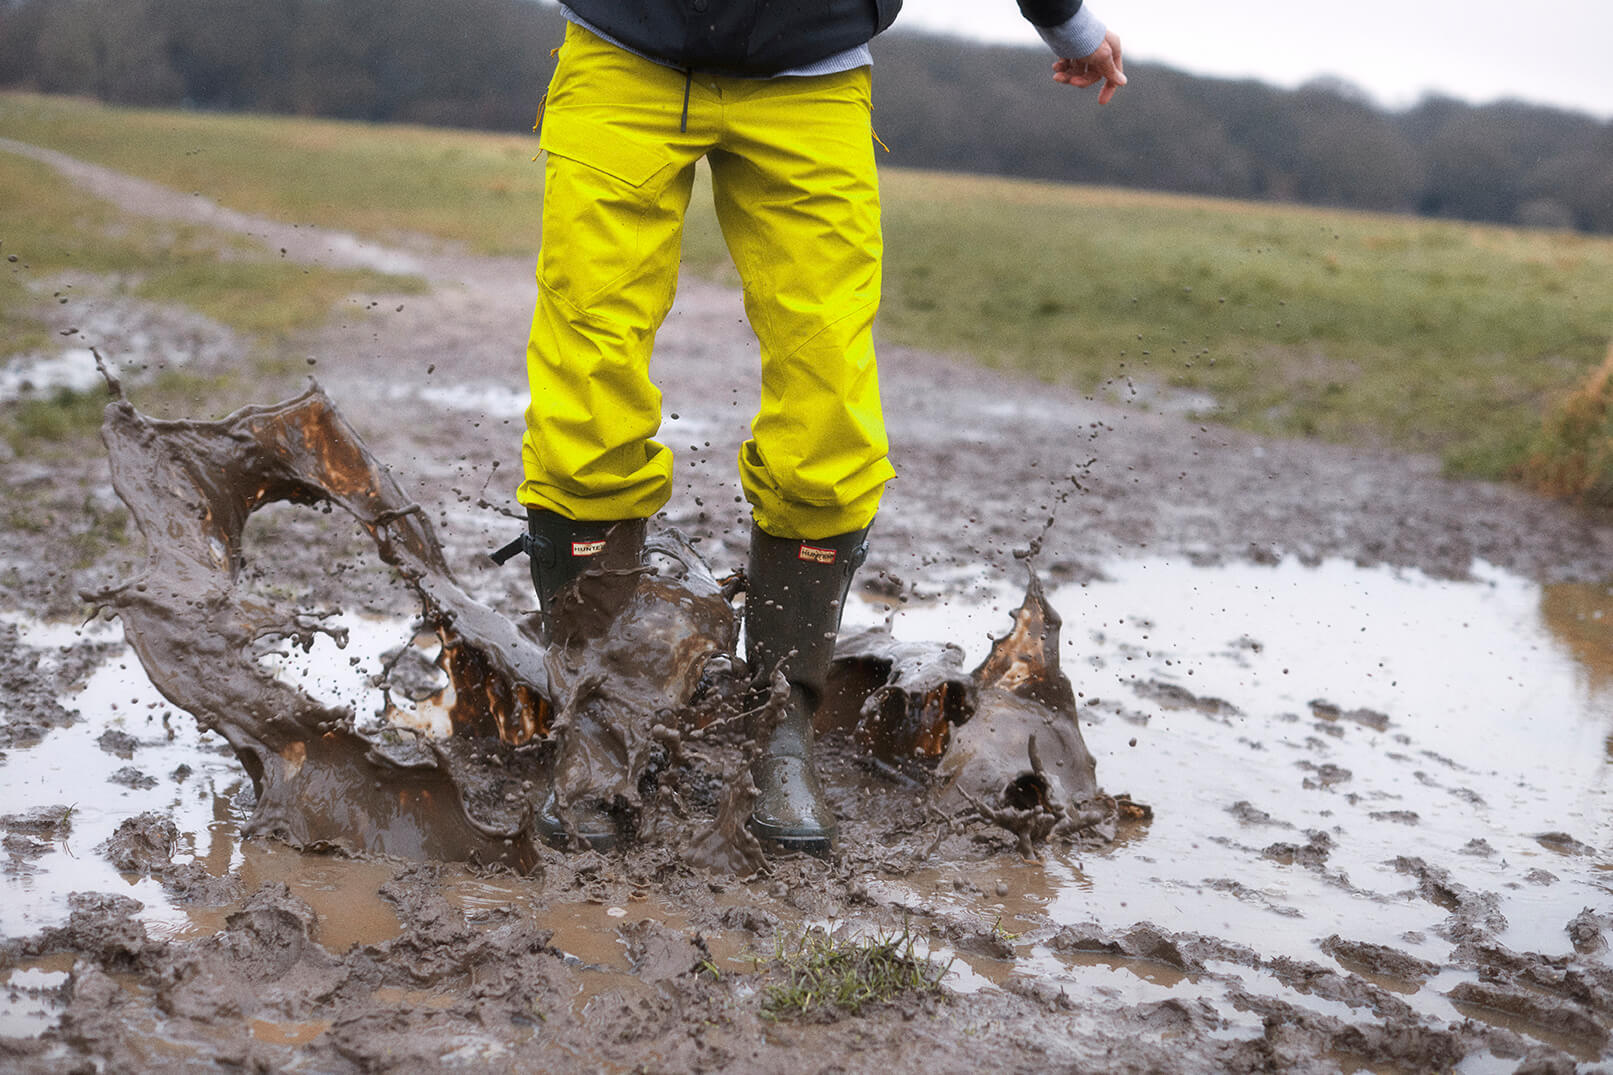 How to Clean Wellies or Rubber Boots Inside and Out